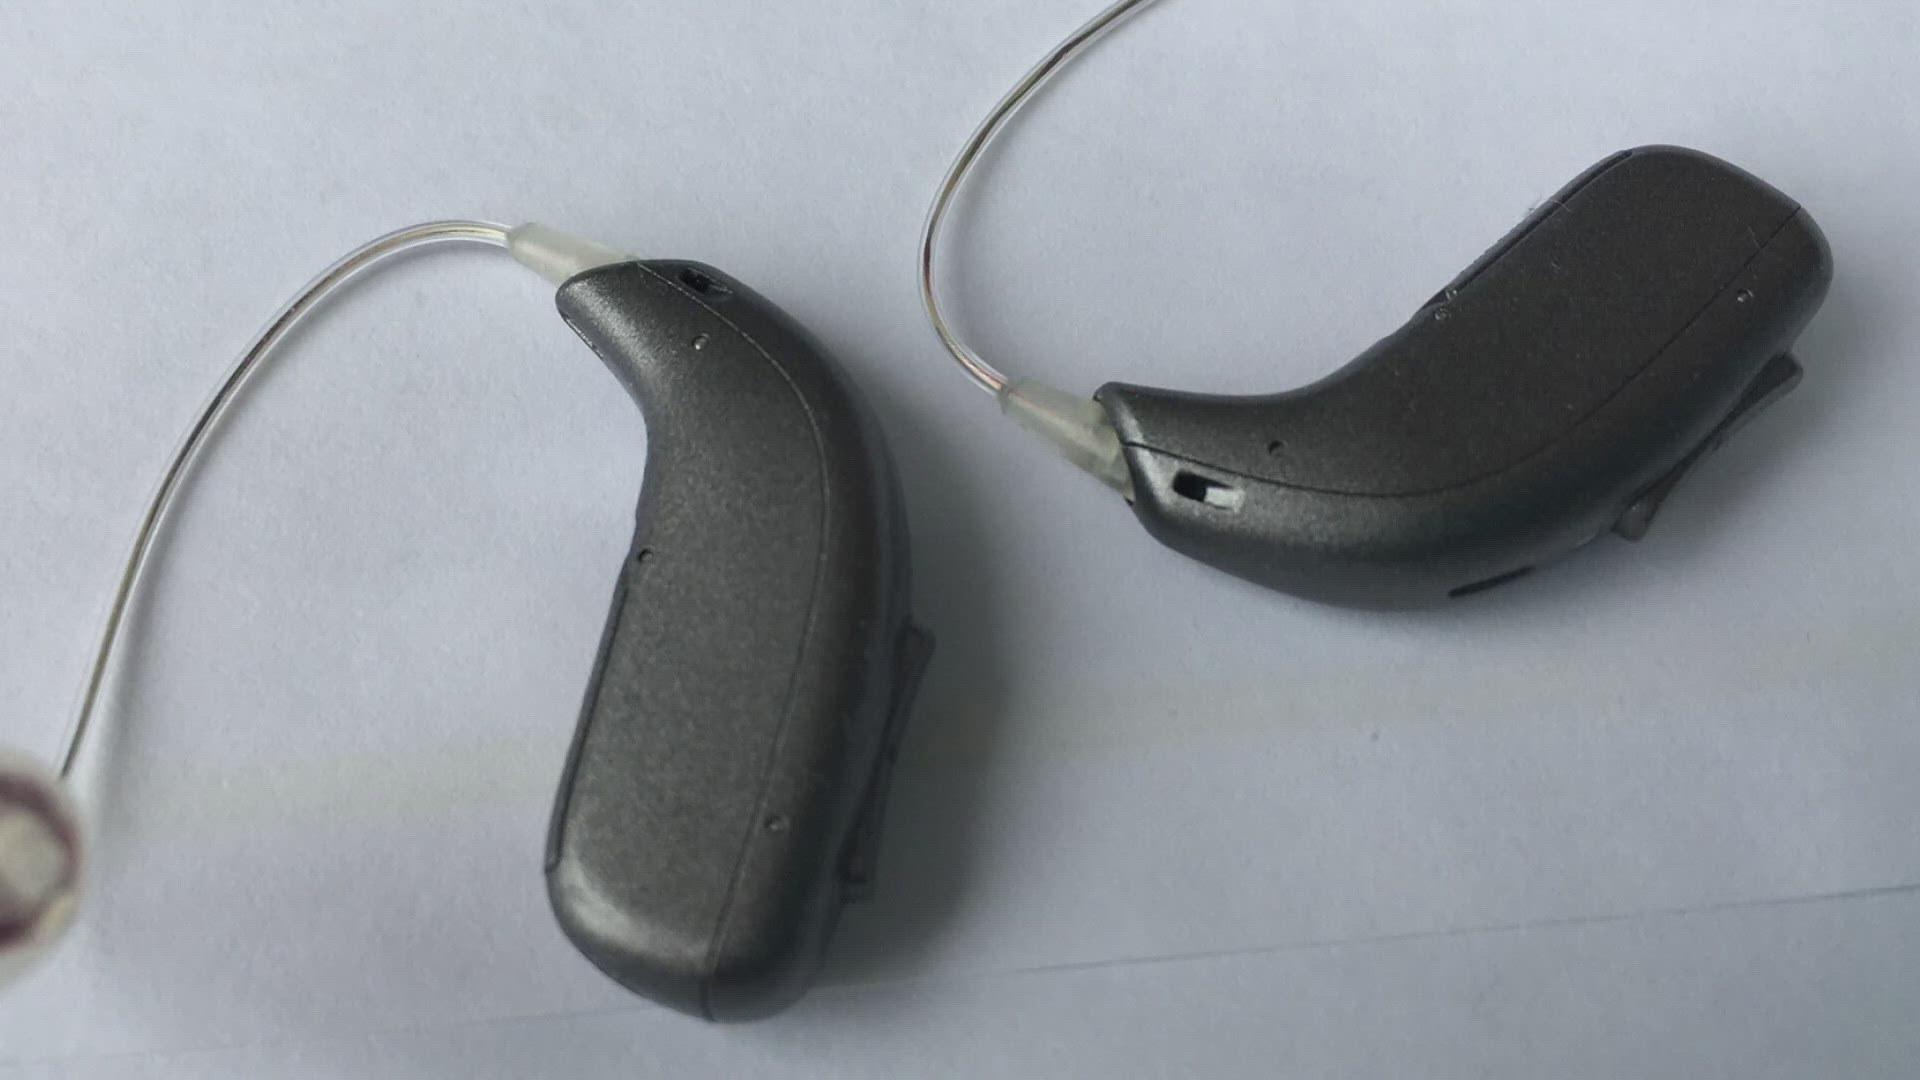 Jim Graves bought the hearing aids in hopes it would help him hear better.